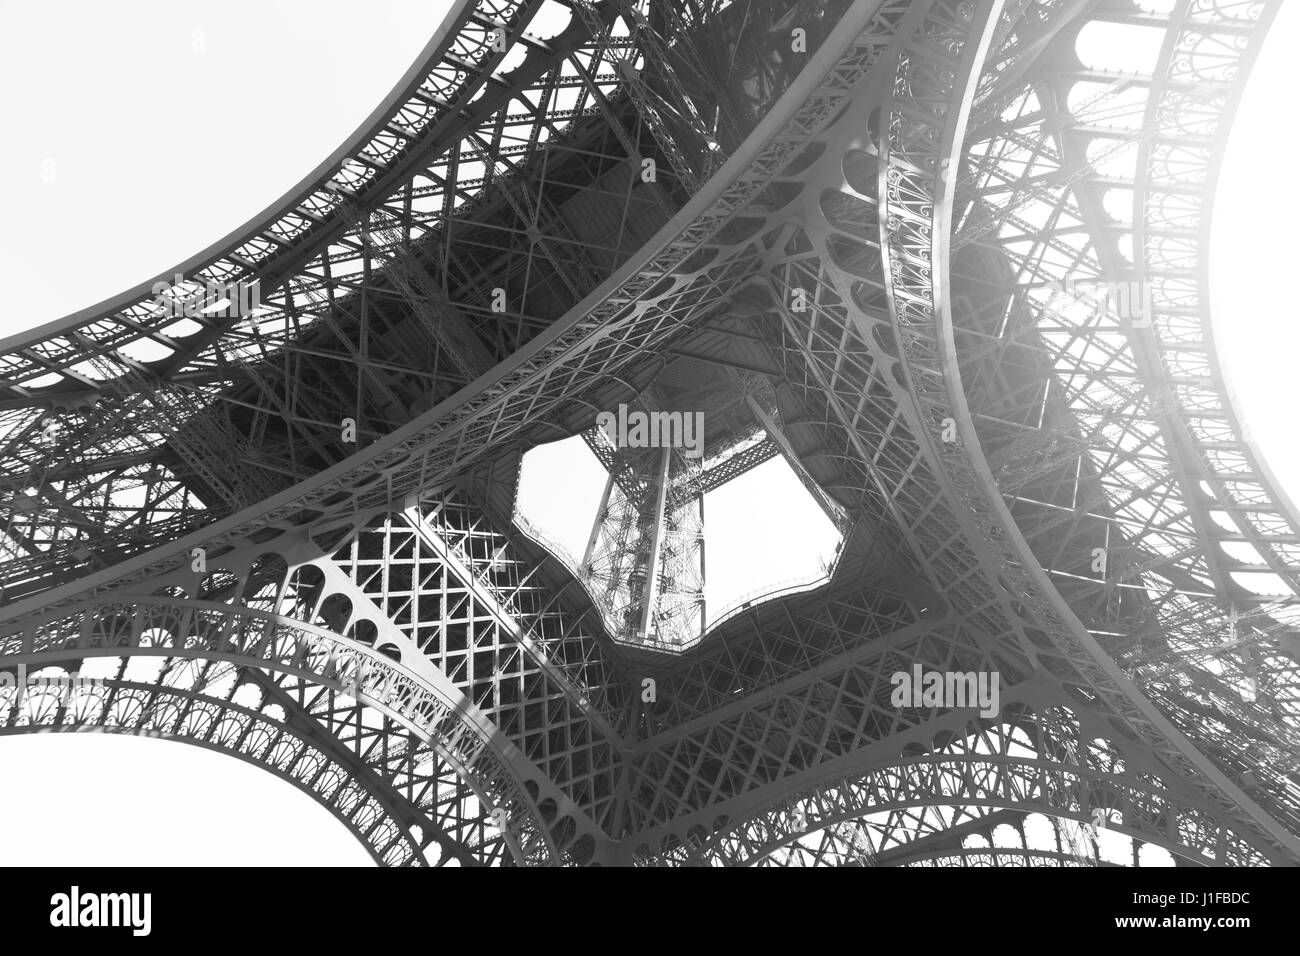 Angle shot of The Eiffel tower in Paris, France. Black and white image Stock Photo